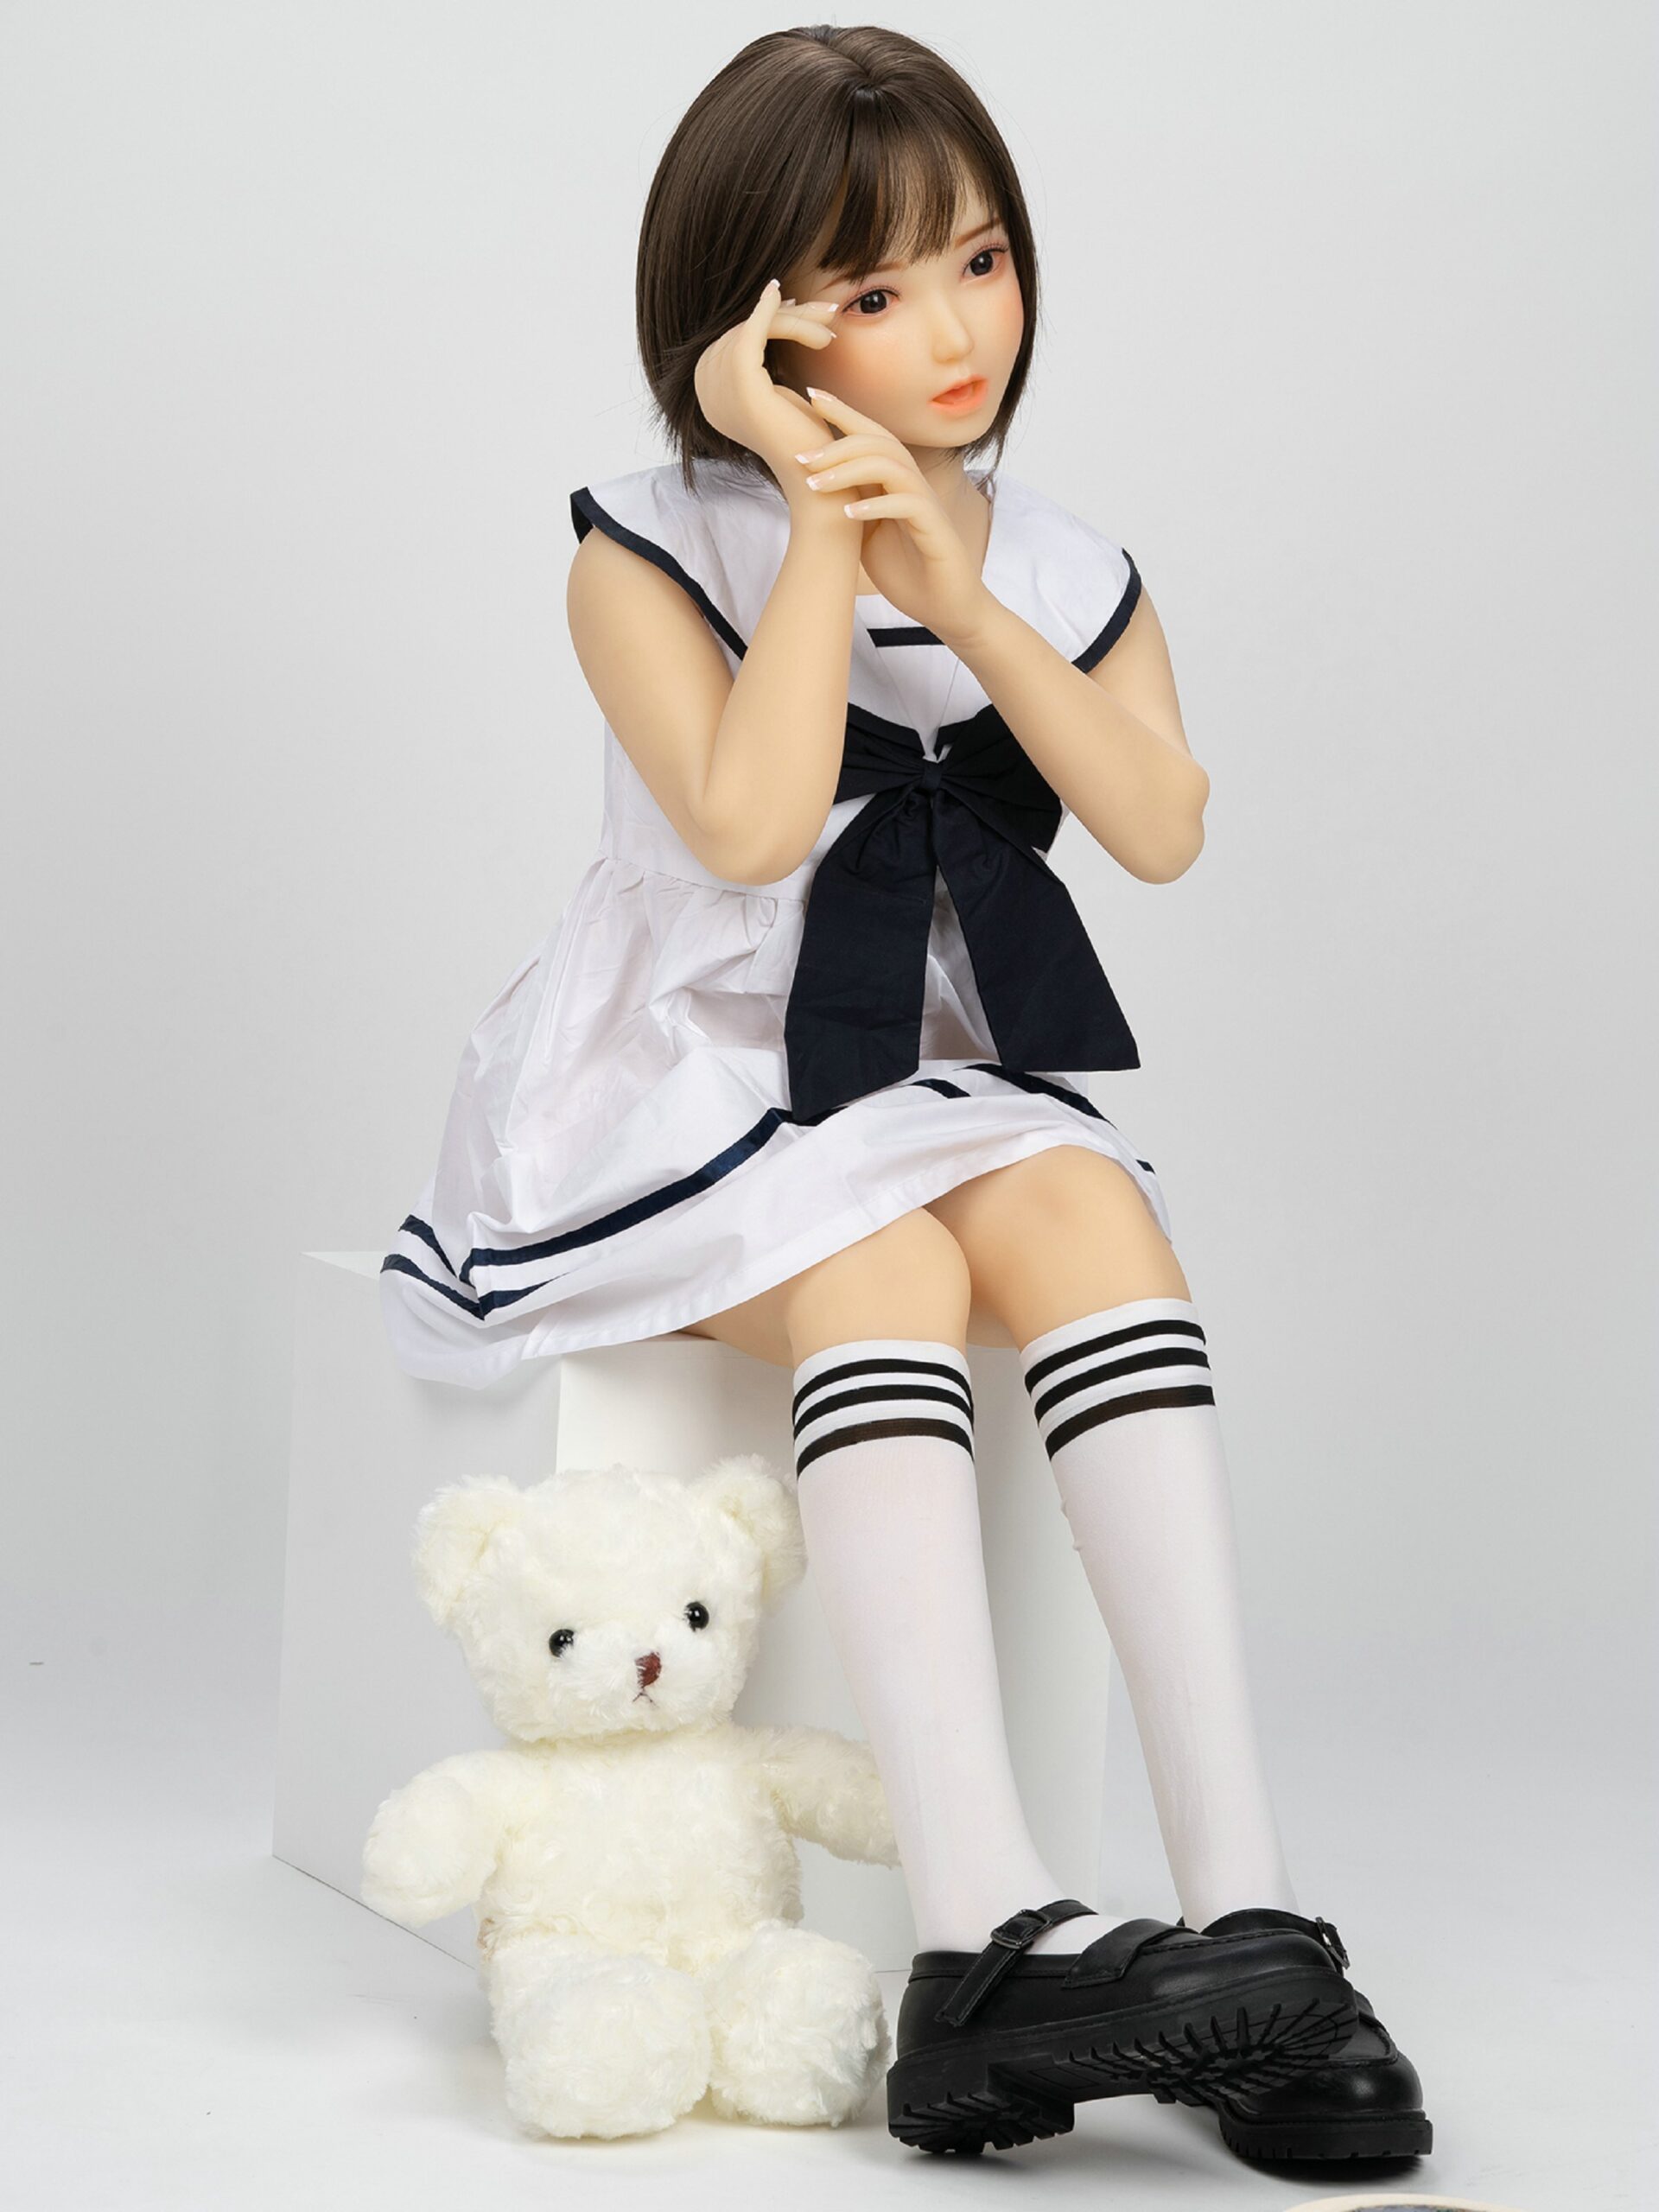 Top Realistic Chinese School Girl Tpe Love Doll Acsexdolls